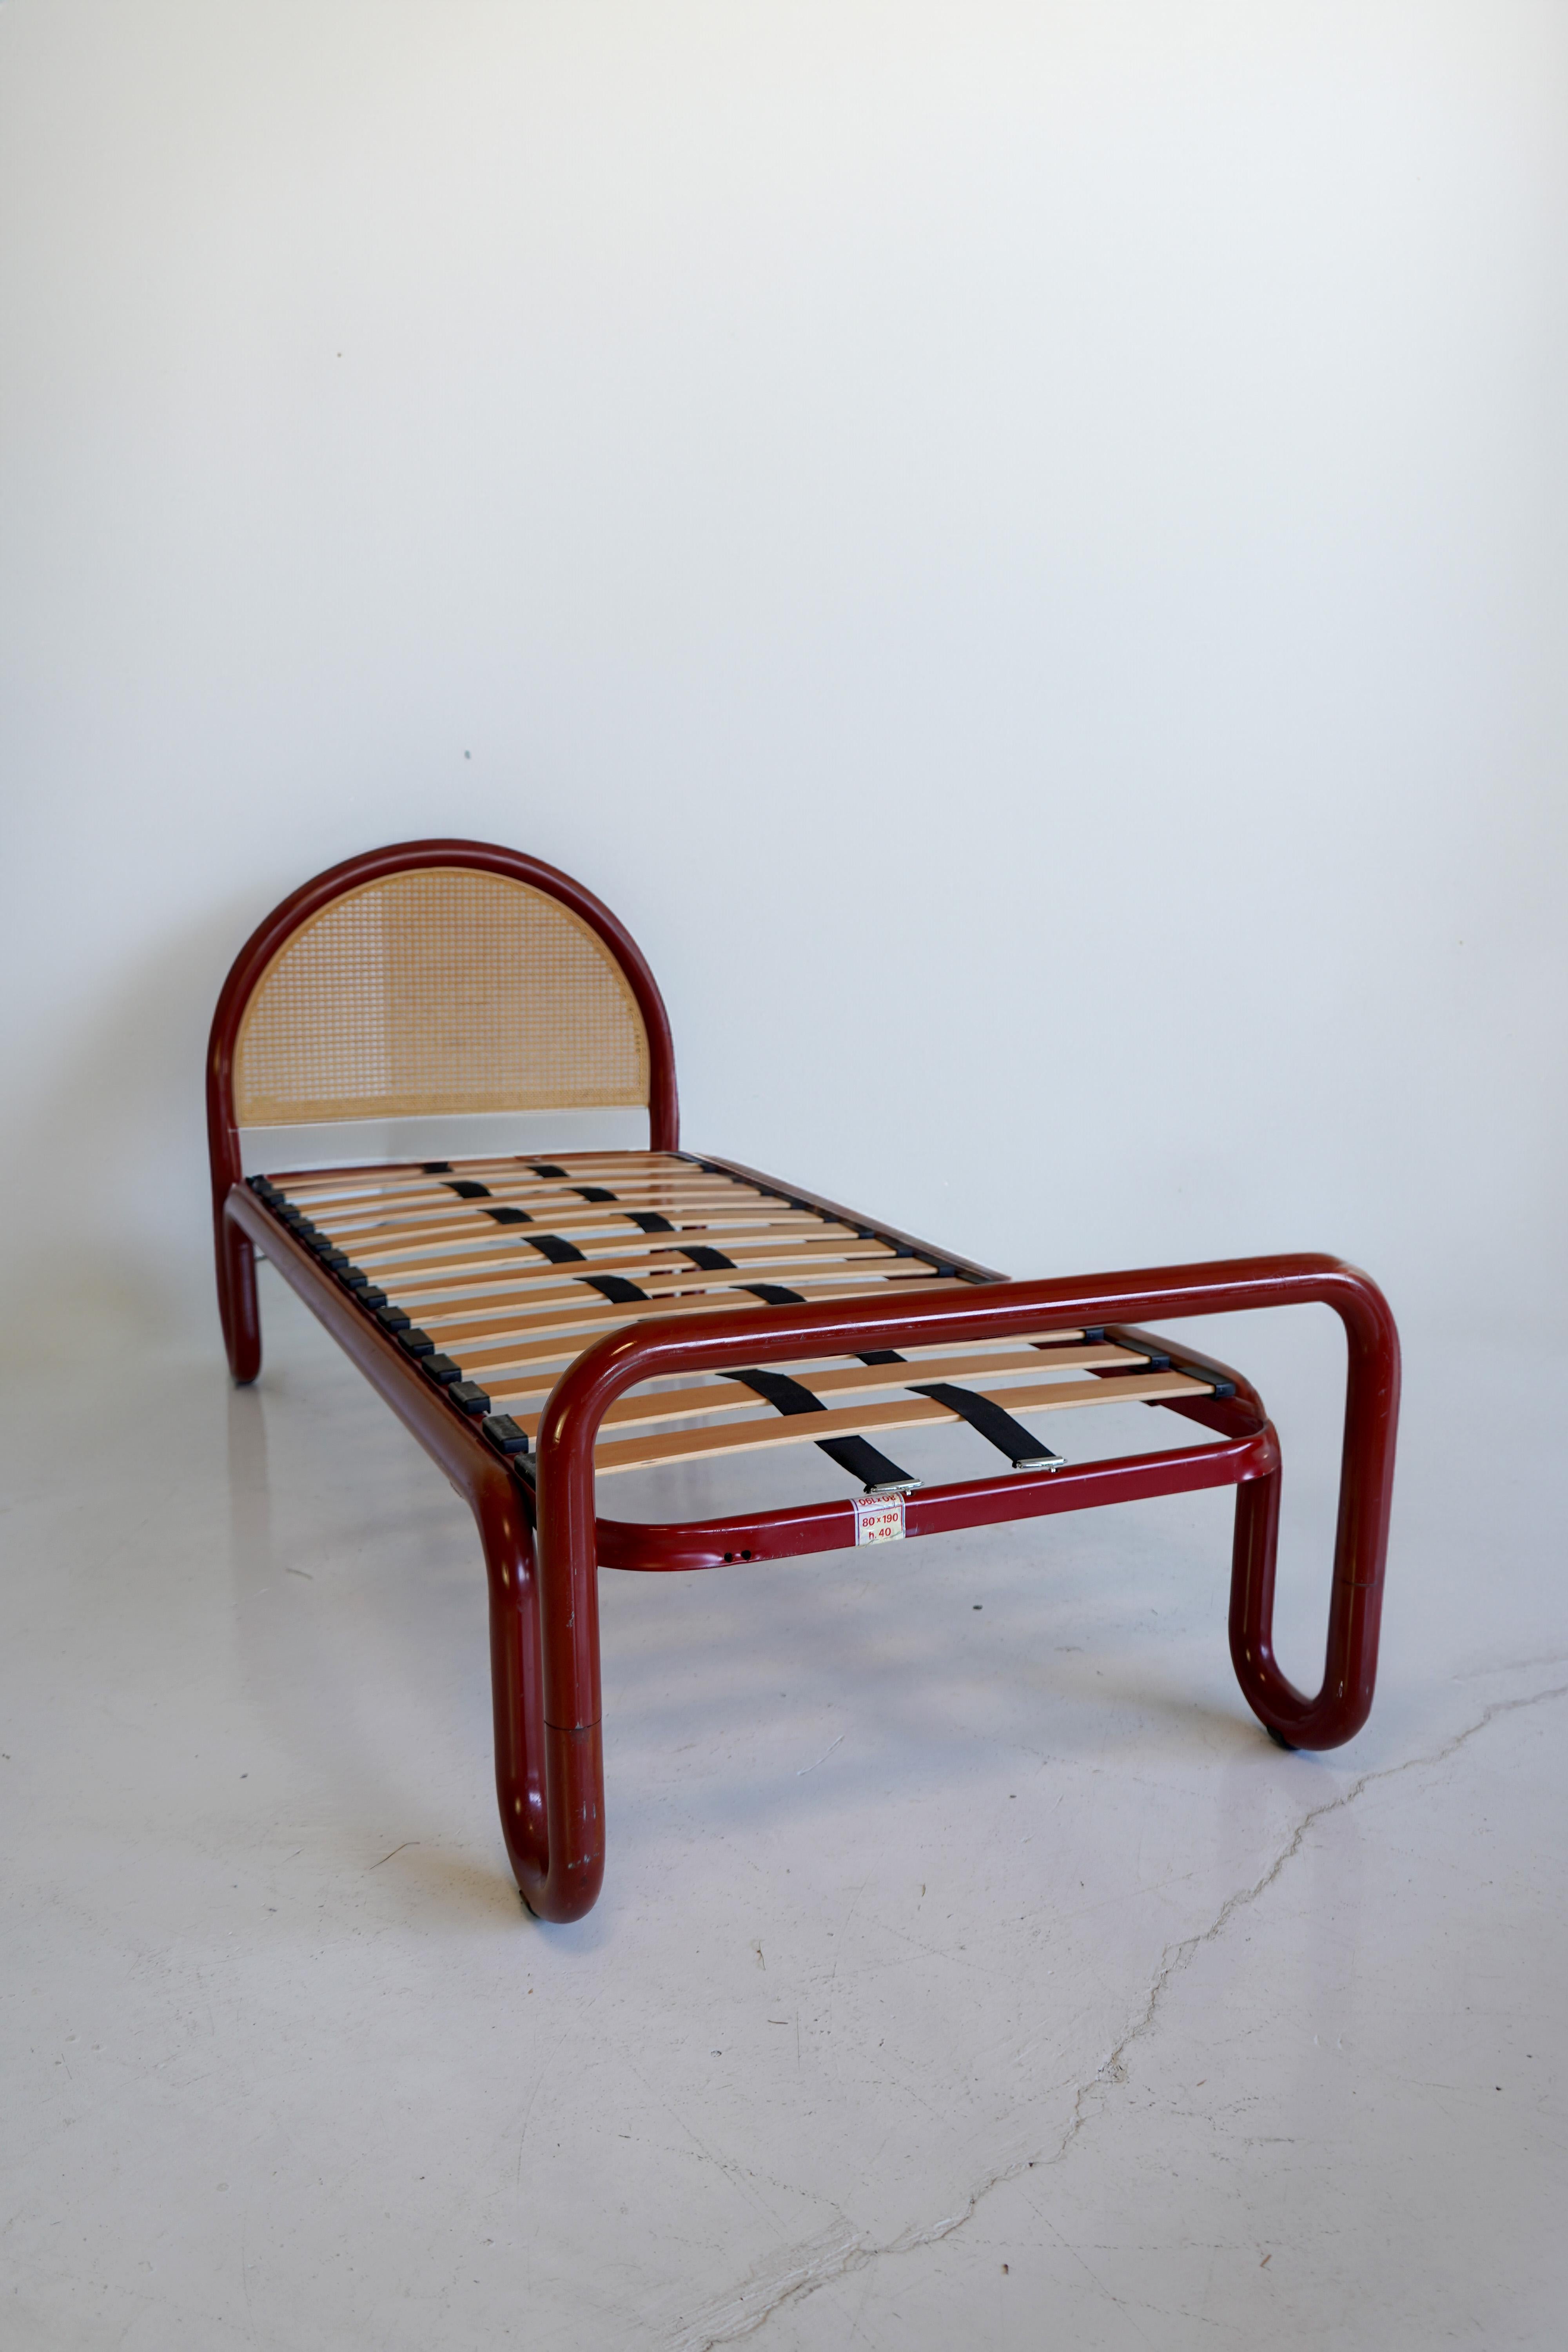 Playful yet elegant pair of vintage Italian beds in red tubular metal with cane headboard. One has had the springs replaced. Knicks to frame but cane is in excellent condition. 

Fits a uk small single mattress which is available for purchase online